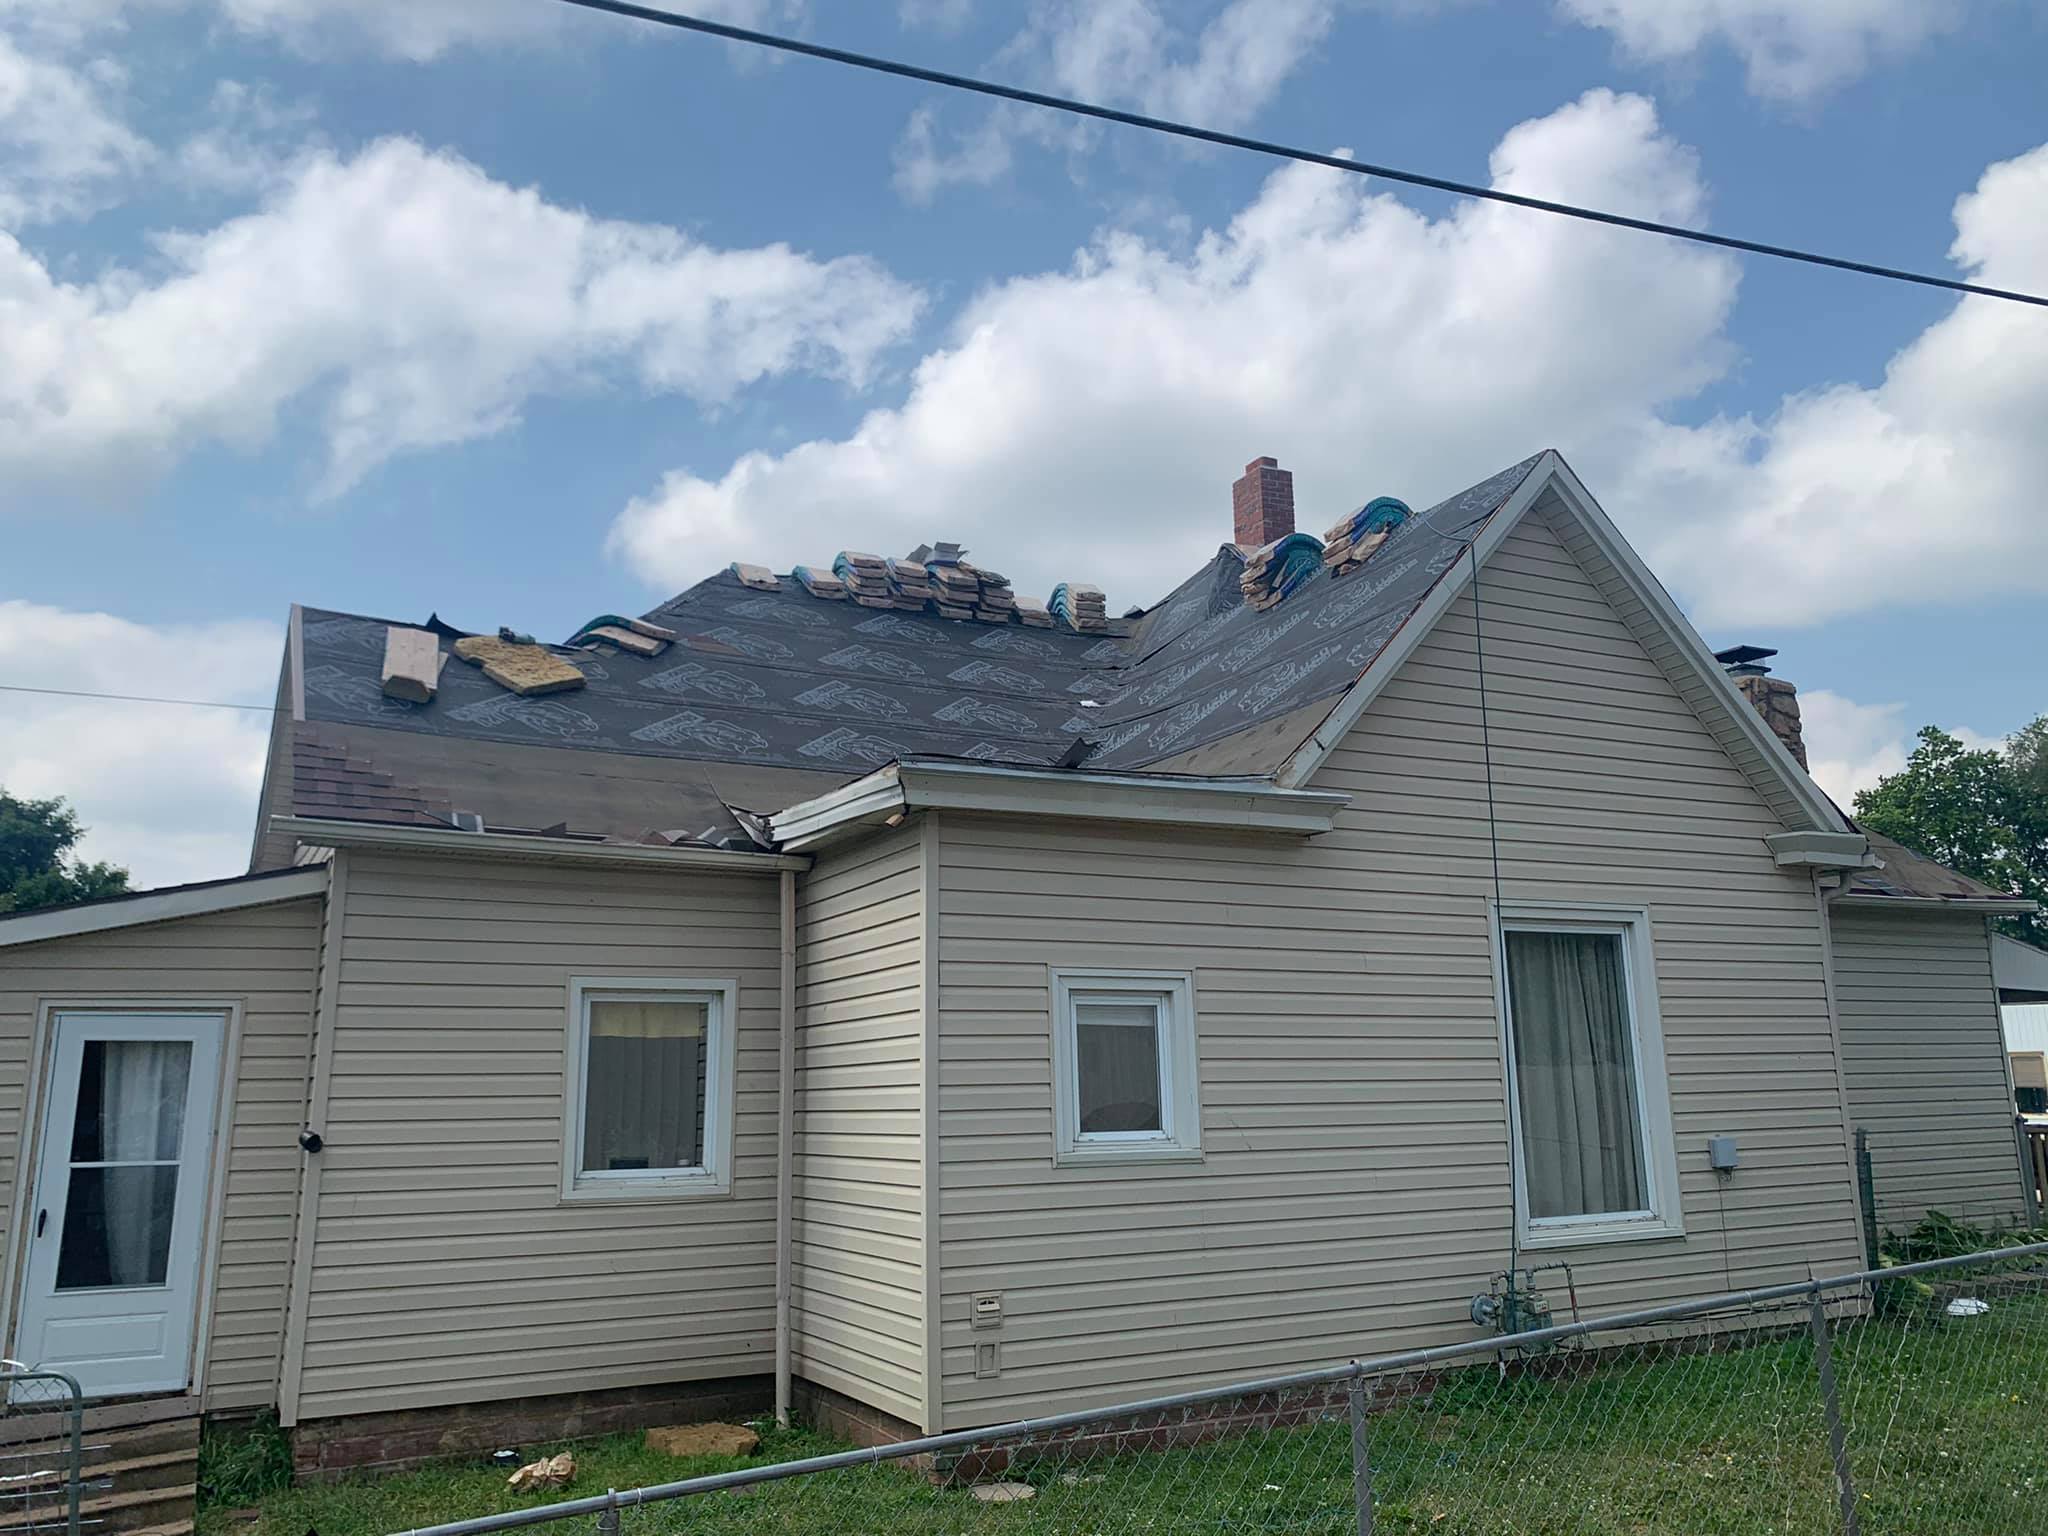 Roofing Companies Near Gladstone Missouri - Tips To Help You Find The Best Company